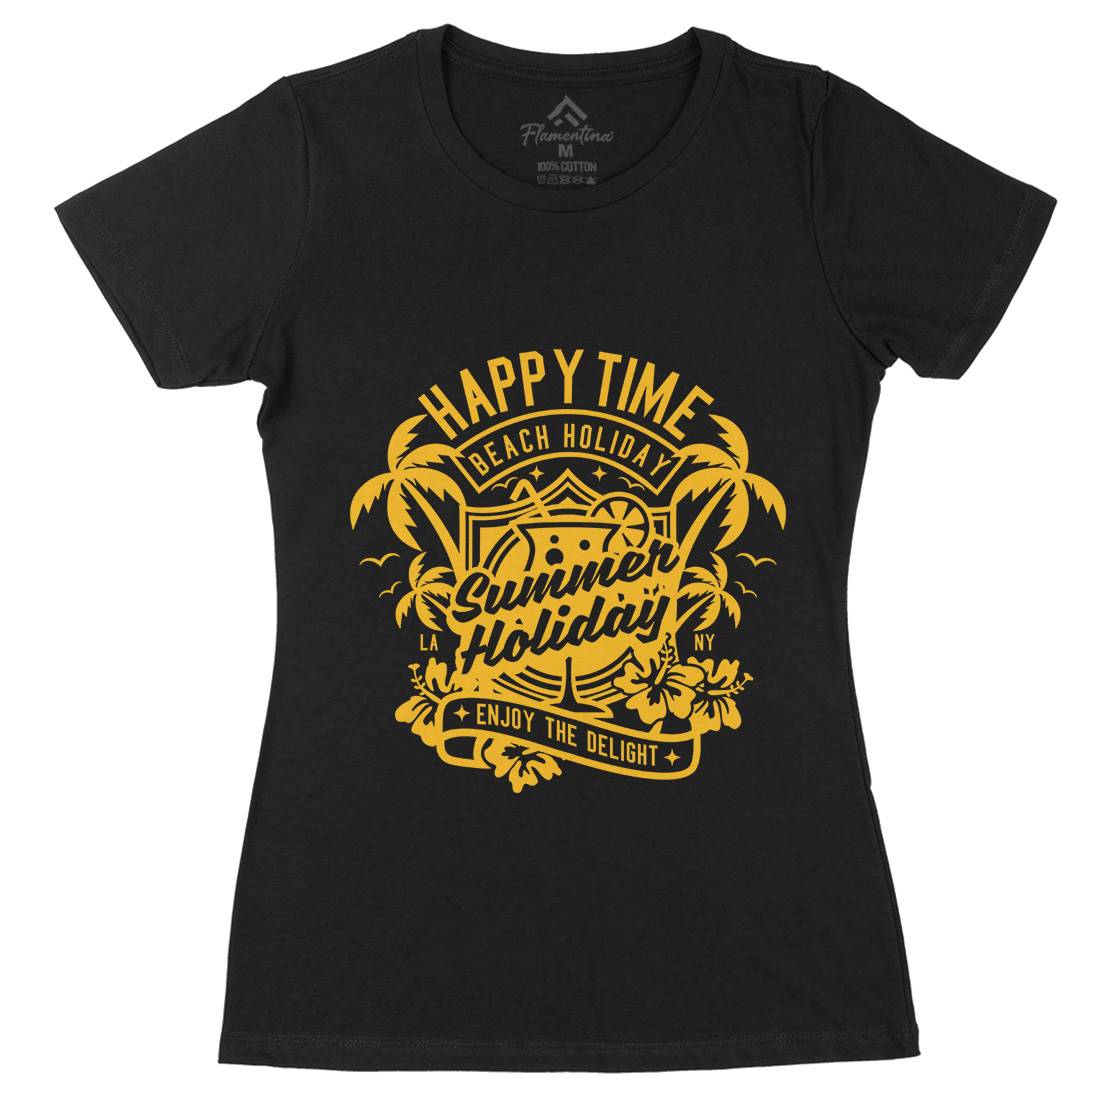 Happy Time Womens Organic Crew Neck T-Shirt Surf A238